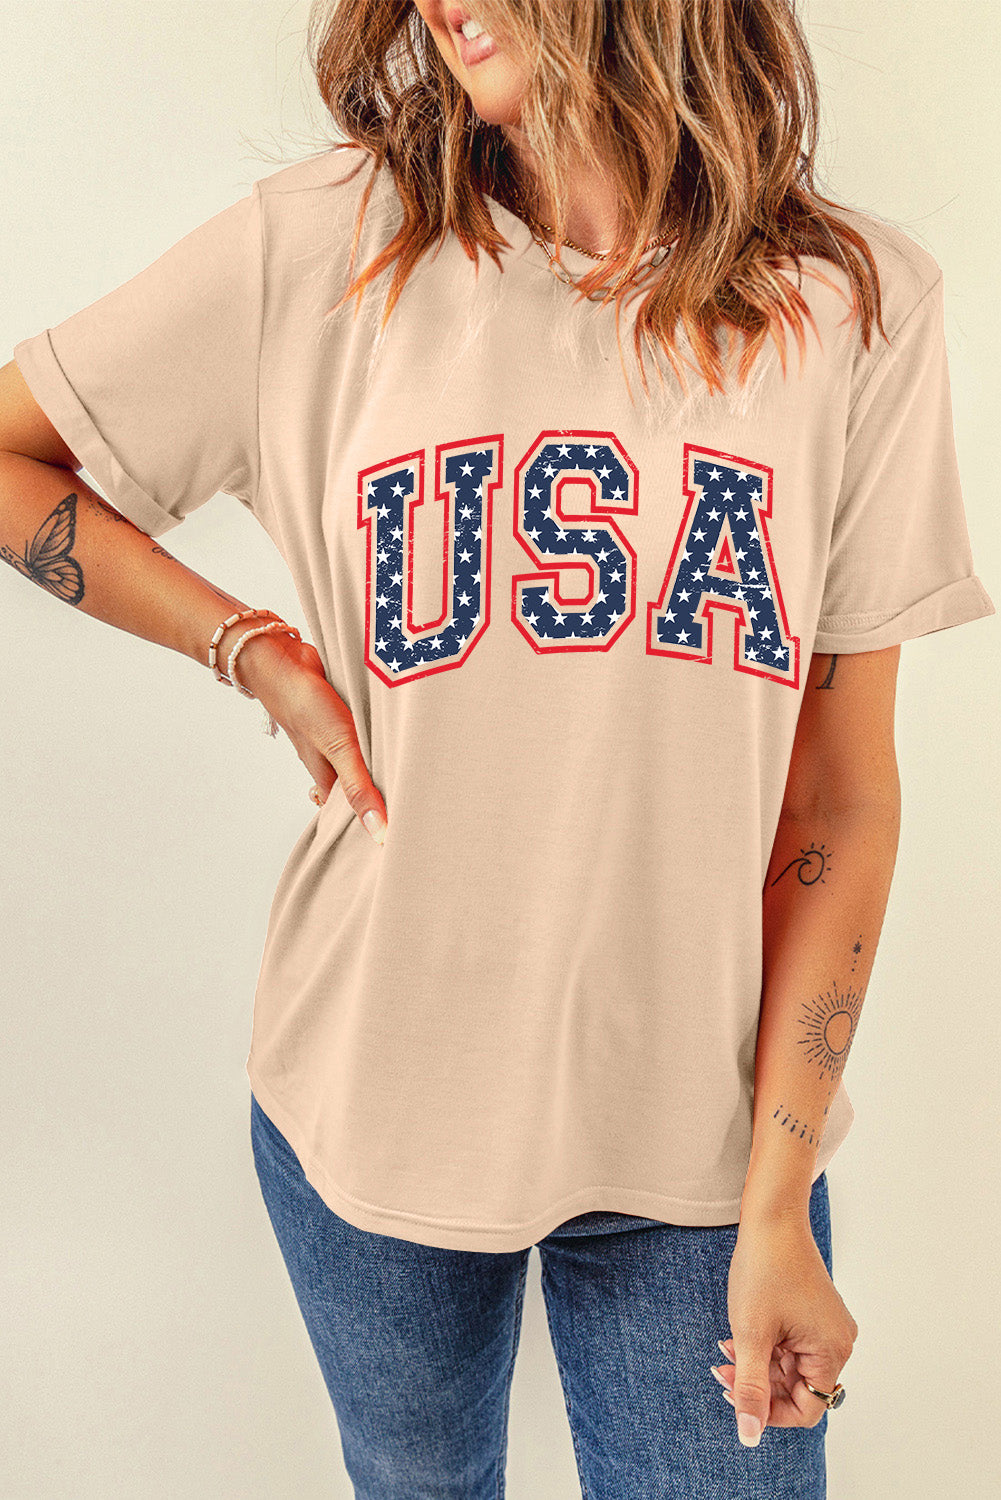 Khaki Starry USA Lettering Independent Day T-shirt Graphic Tees JT's Designer Fashion